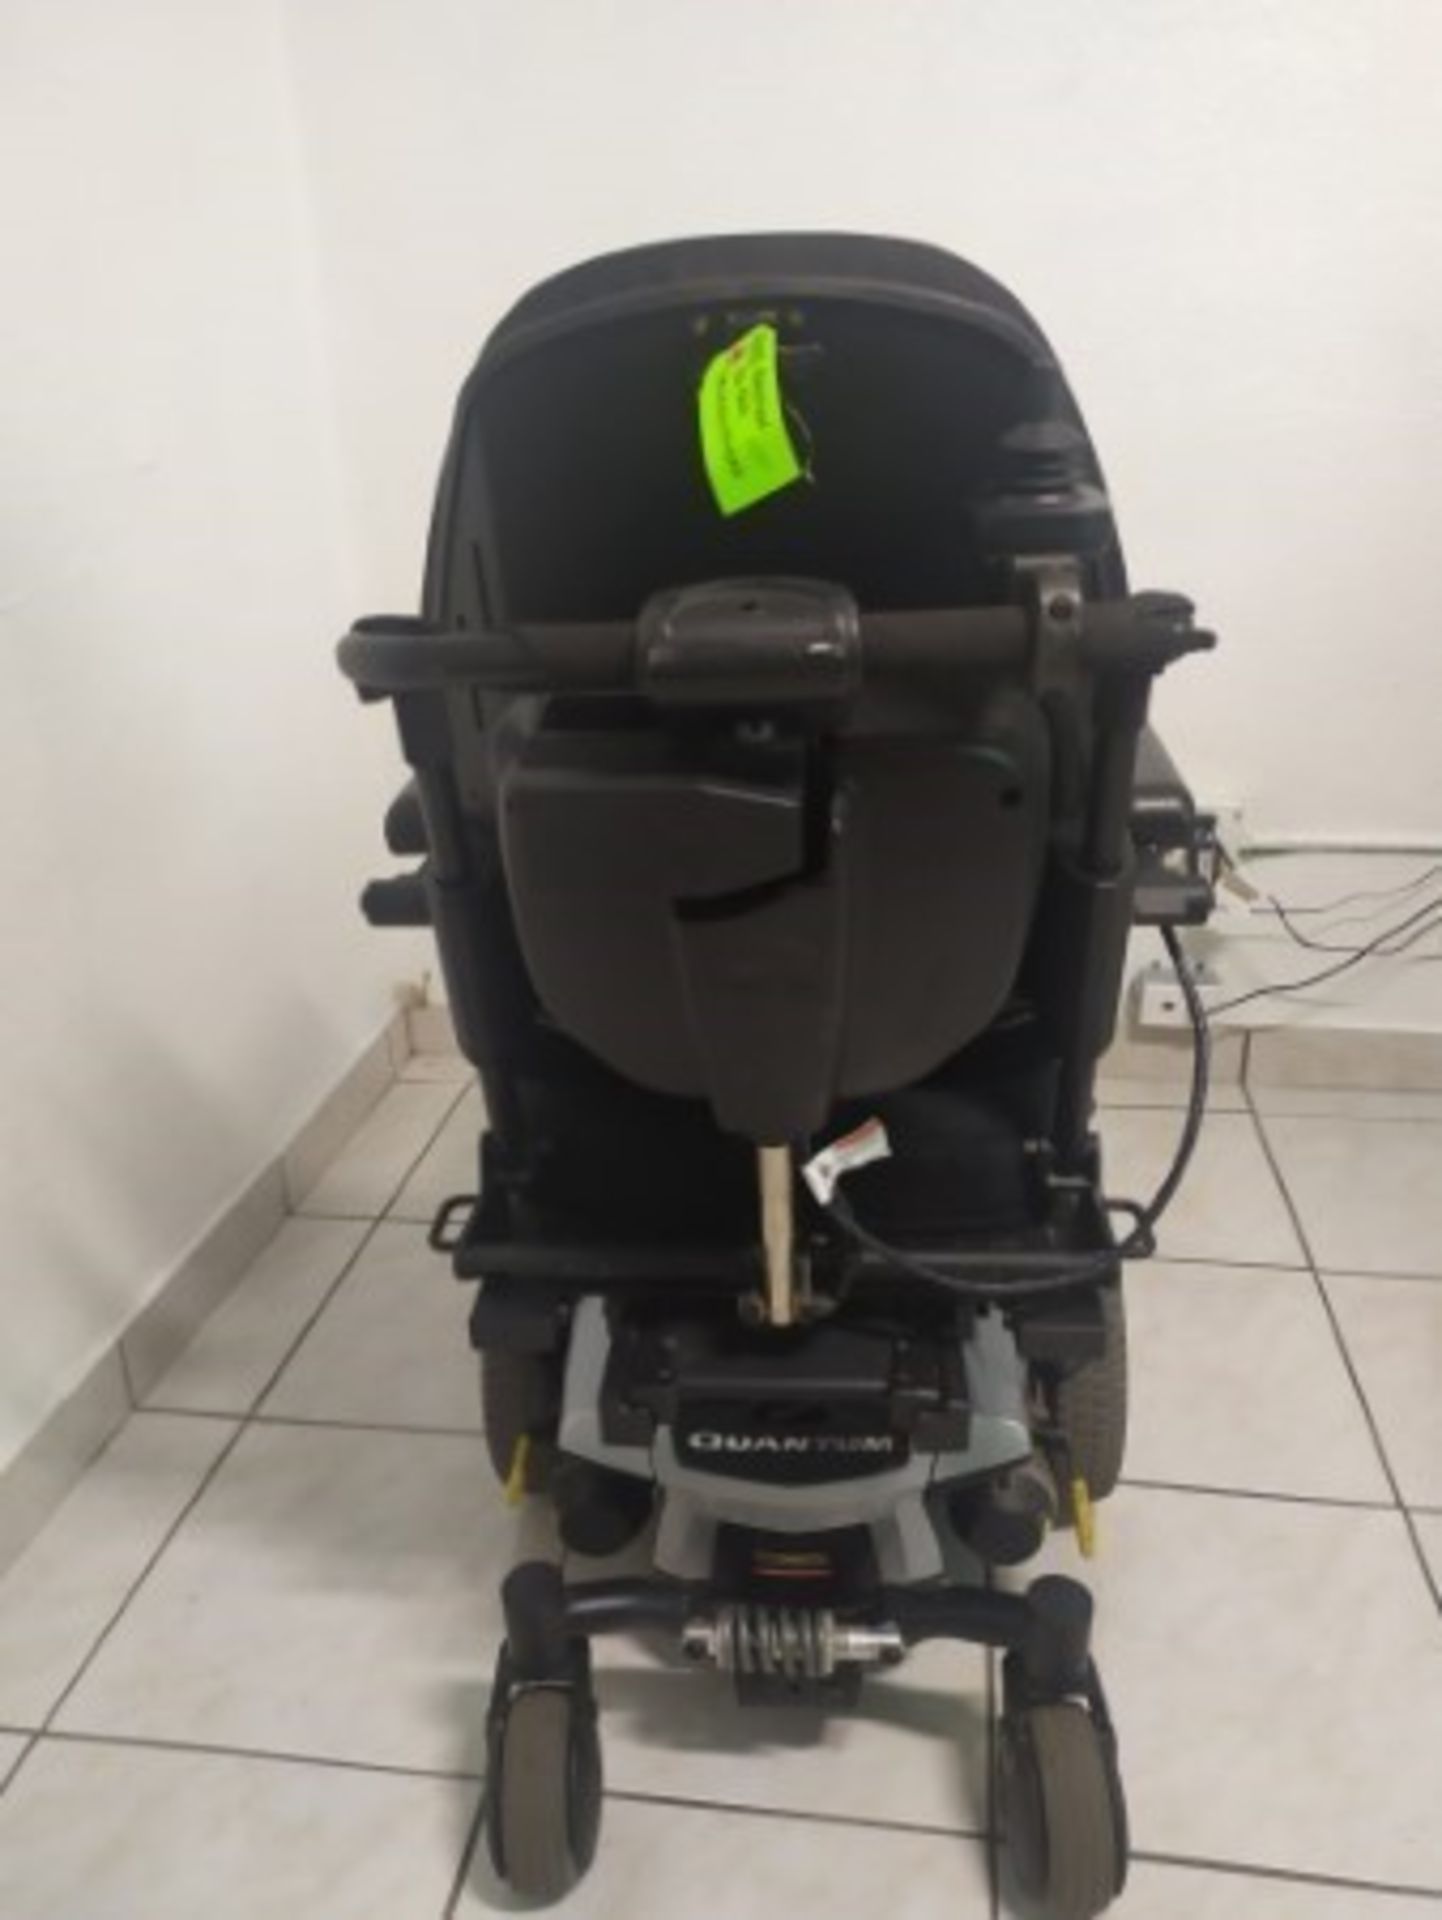 2011 QUANTUM Q6 EDGE 6-WHEEL REHAB POWER CHAIR WITH 2 JOYSTICK CONTROLS (PROBLEM IN BACK LIGHT OF JO - Image 2 of 7